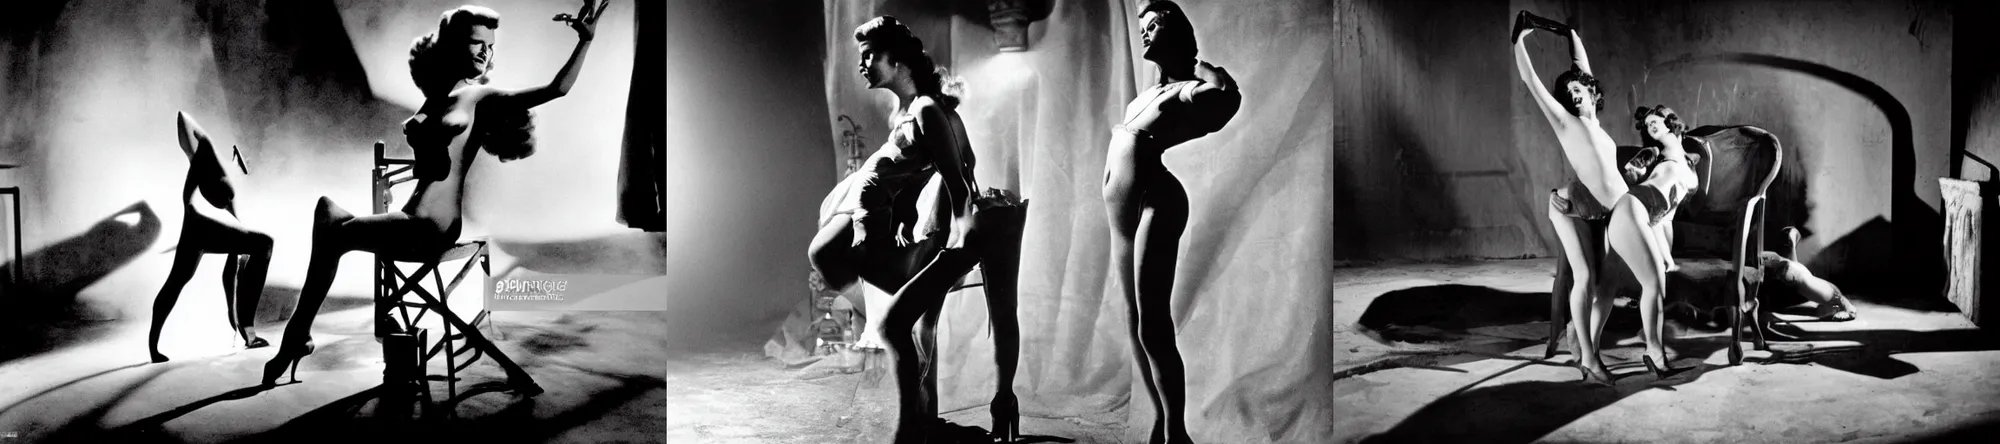 Prompt: scene from felicia, a 1 9 4 8 film by orson welles starring rita hayworth in the style of marquis de sade. black and white, studio lighting, award winning photography.